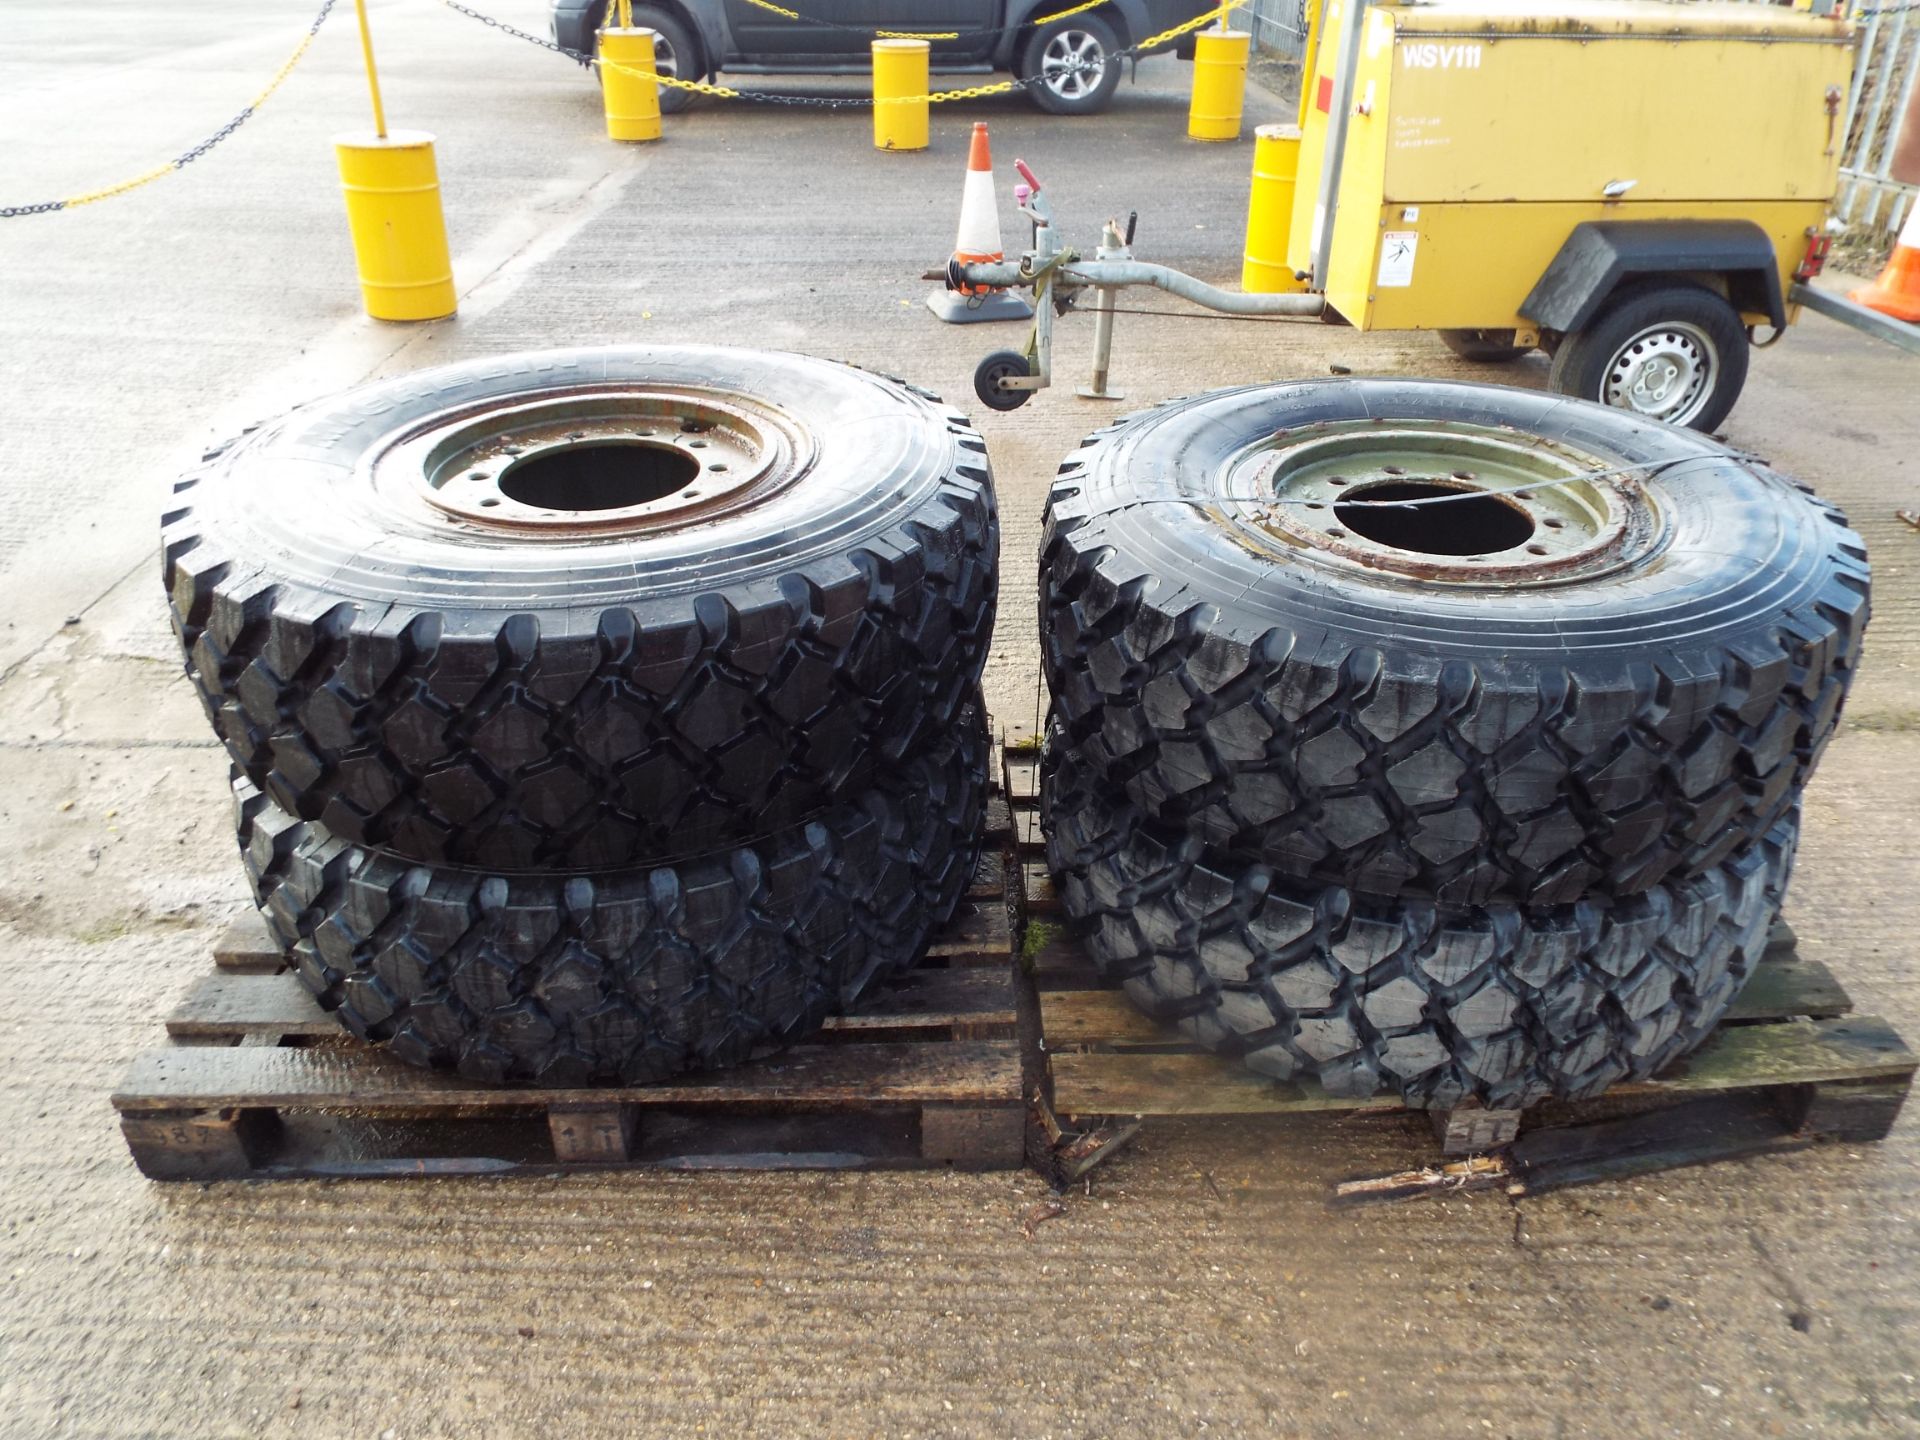 4 x Michelin XZL 365/85 R20 Tyres with Runflat Inserts and 10 Stud Rims